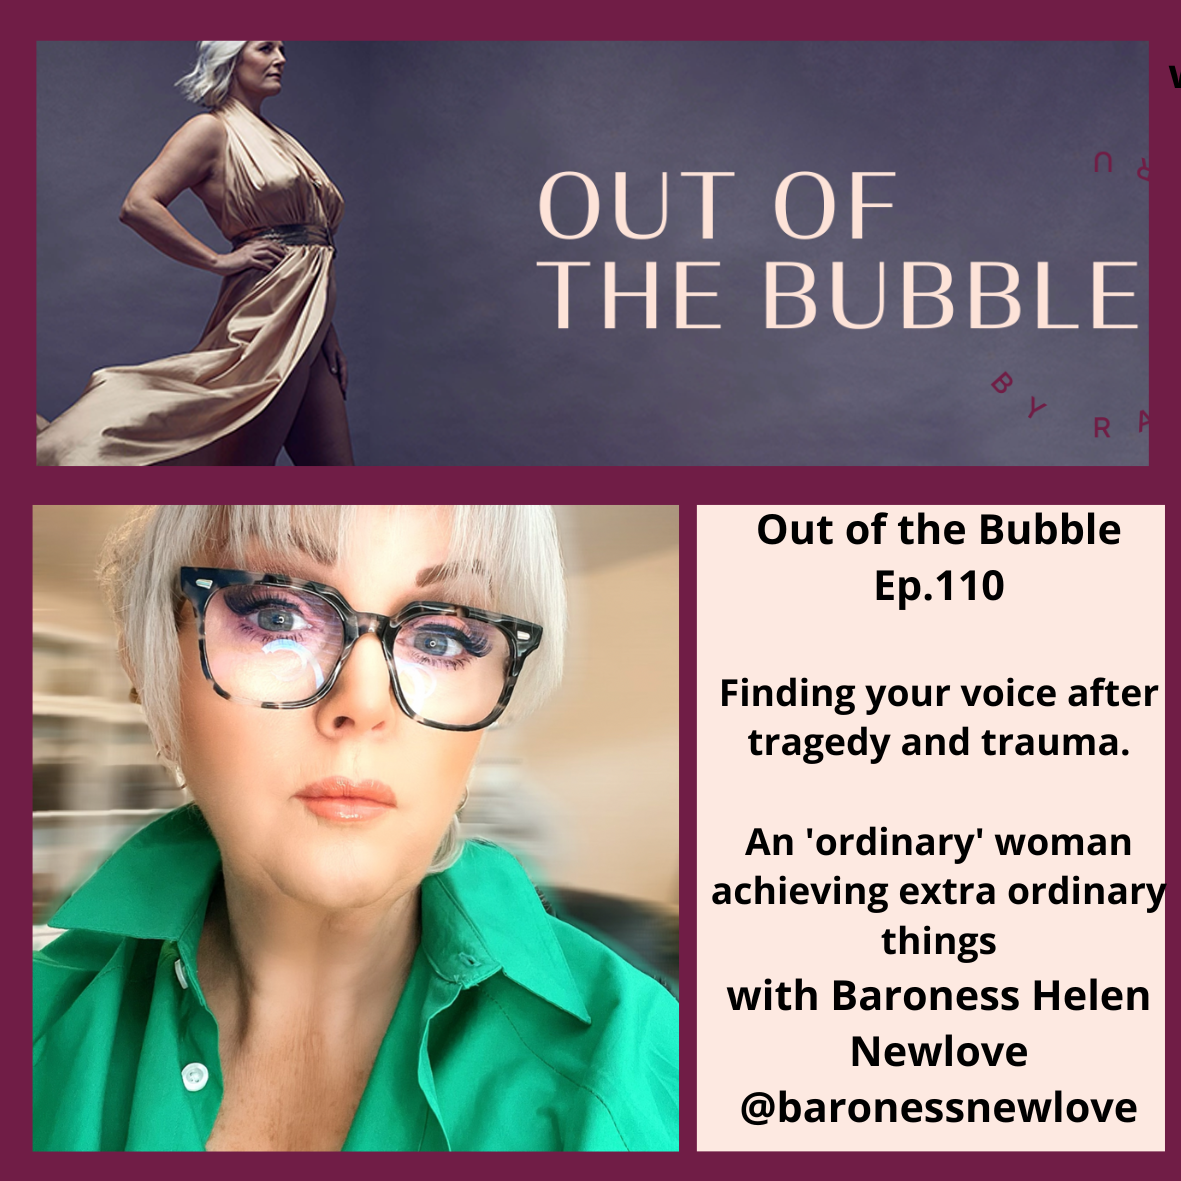 Ep.110 Finding your voice after tragedy and trauma, an 'ordinary' woman achieving extra ordinary things, with Baroness Helen Newlove.